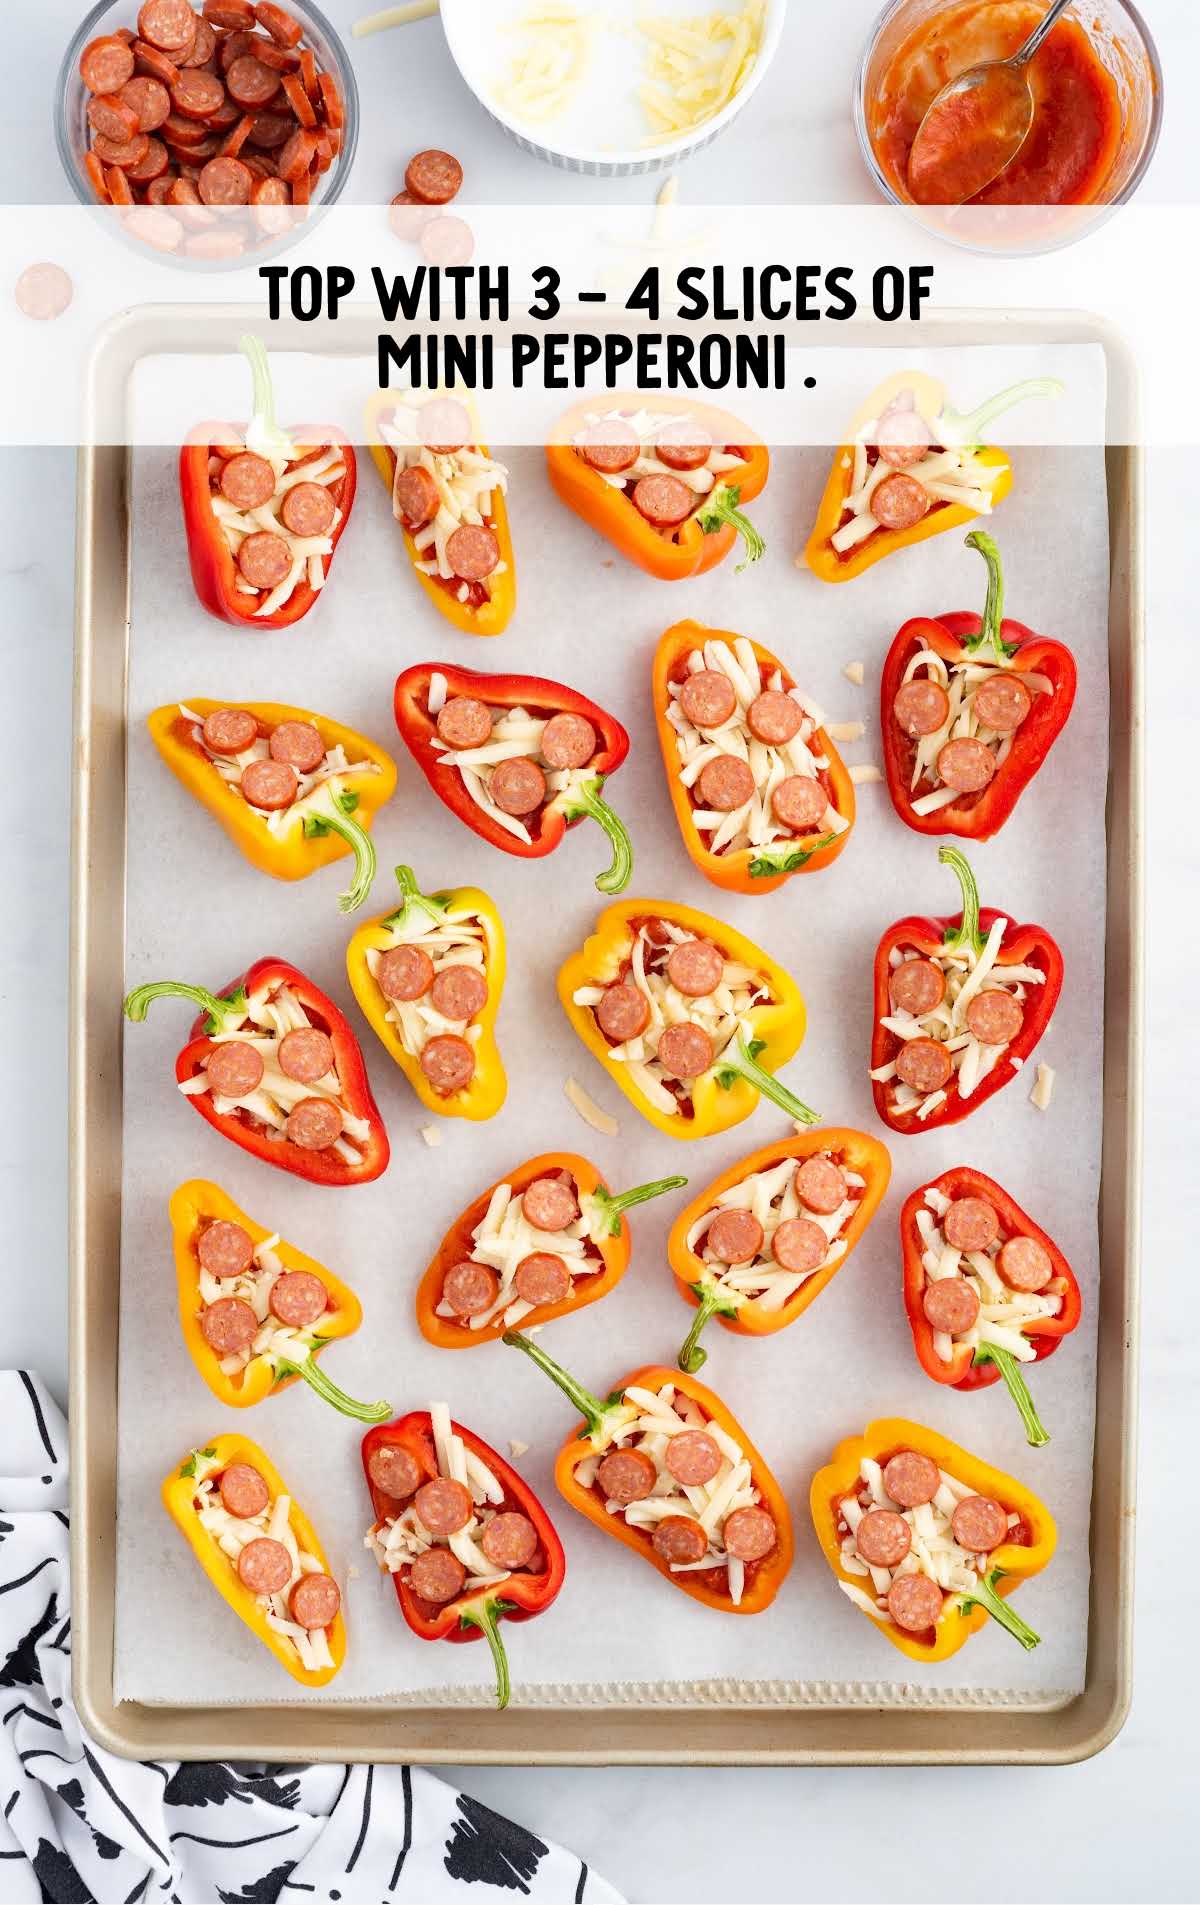 pepper pizza bites topped with pepperoni slices on a baking tray